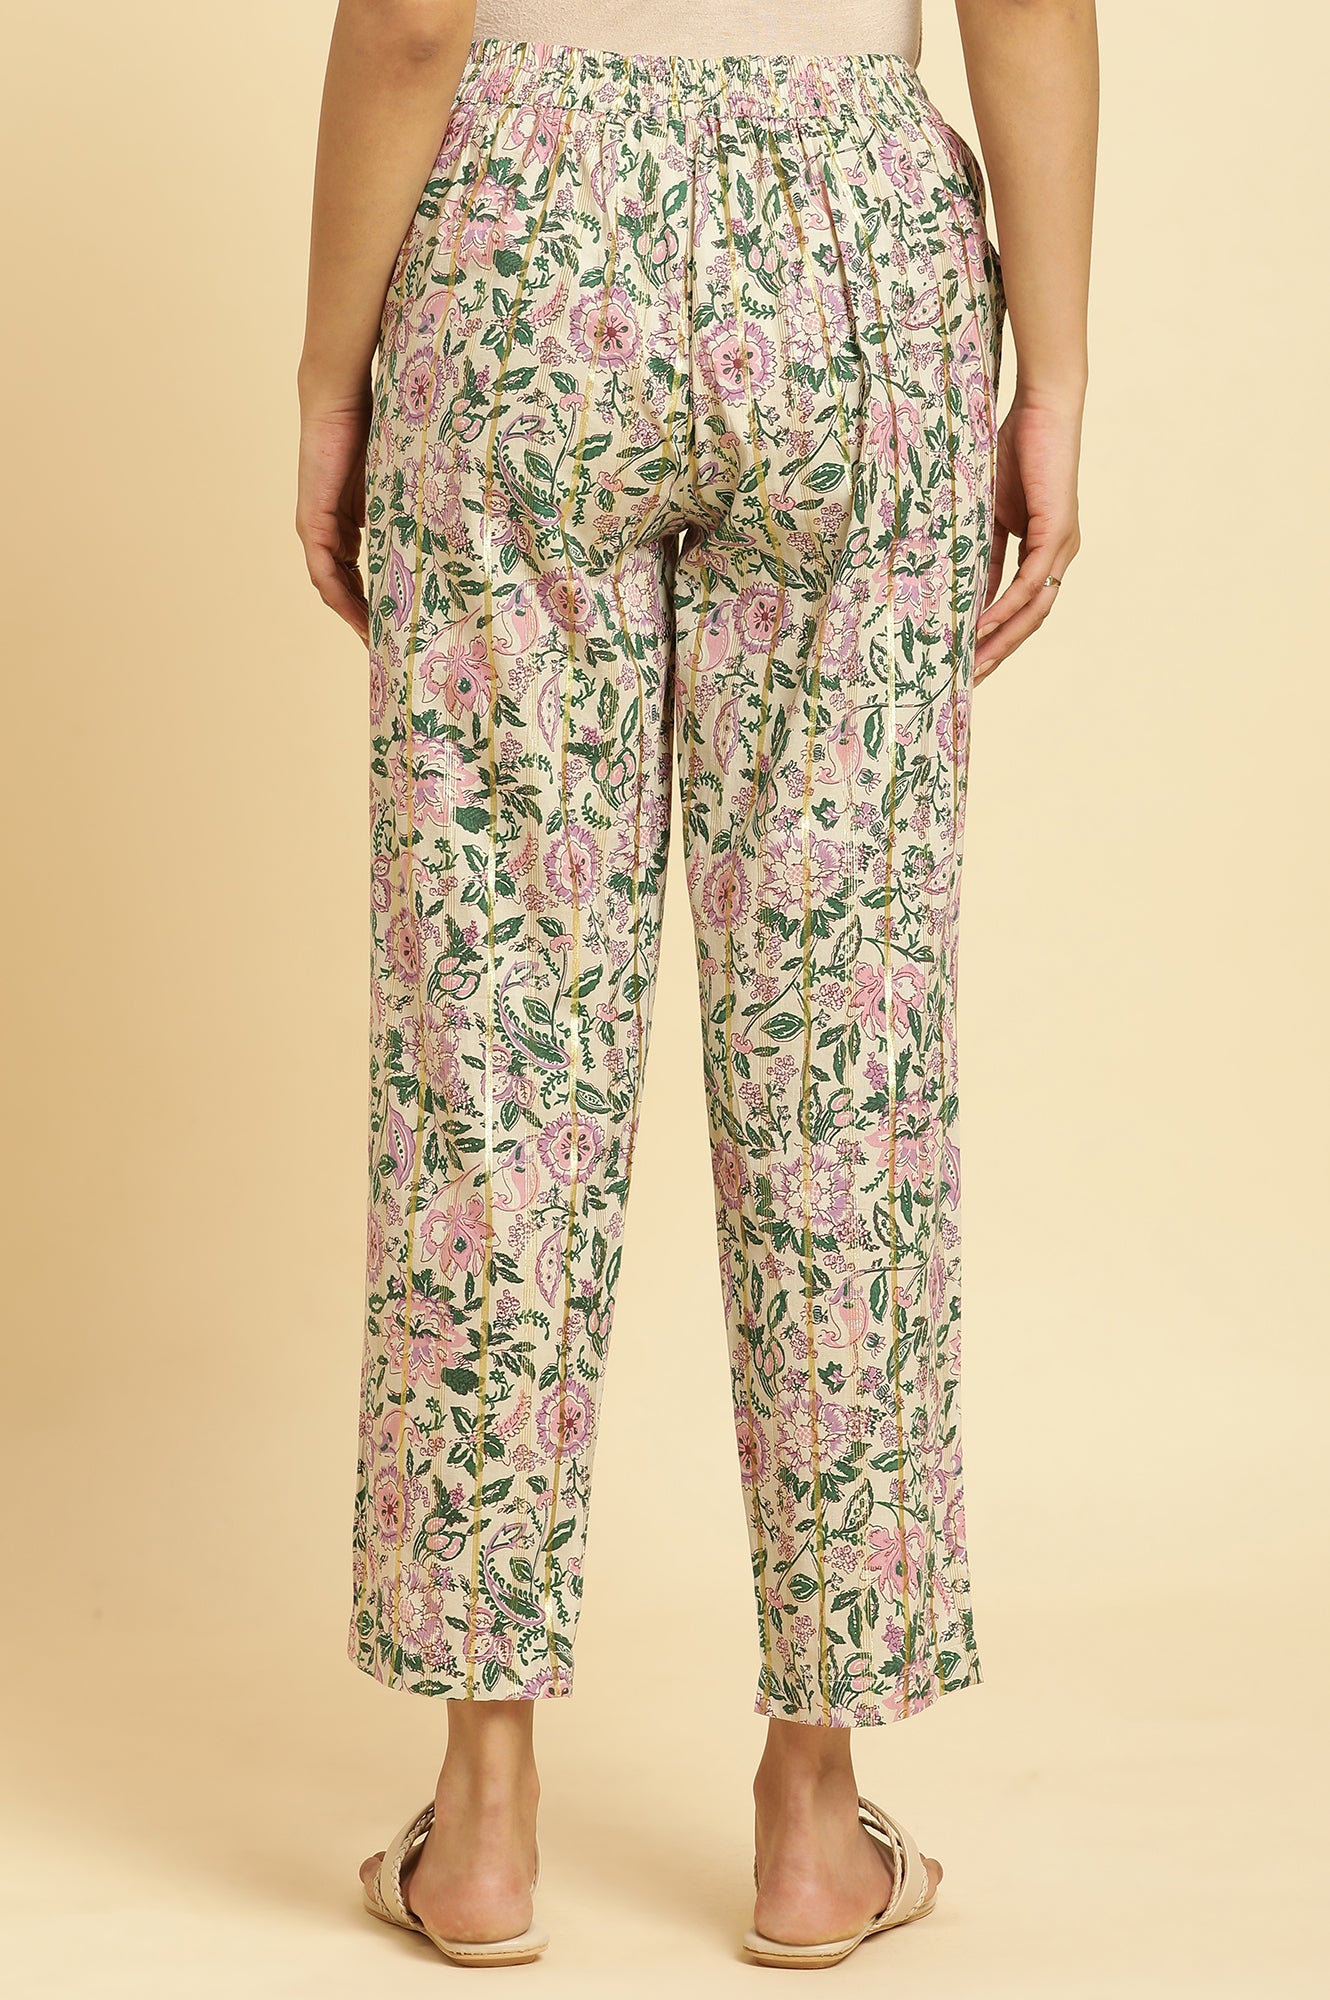 Ecru Straight Pants With Multi-Coloured Floral Print